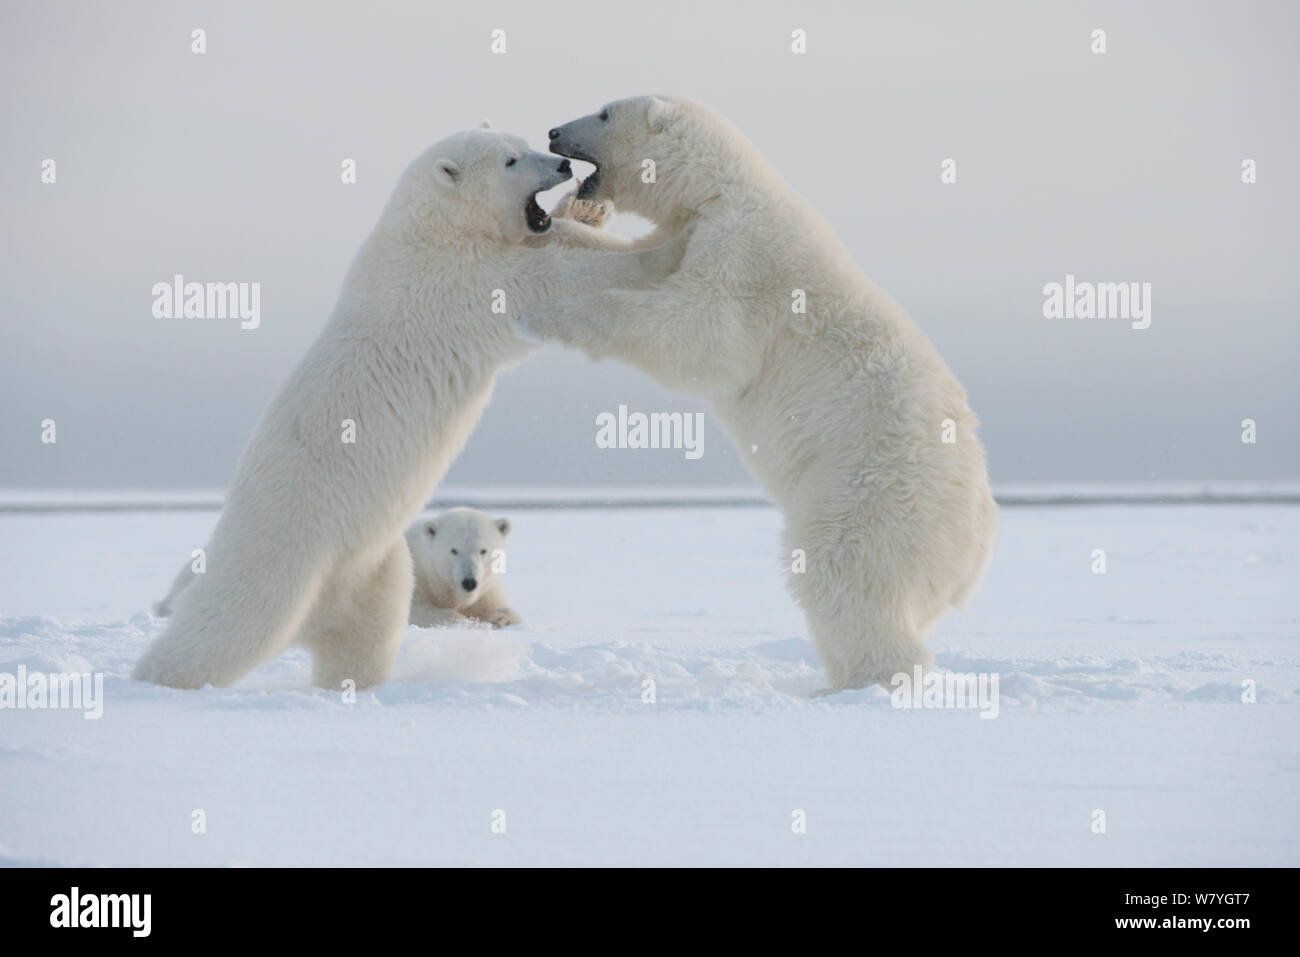 Polar bear (Ursus maritimus) mother resting as her juveniles play fight on newly forming pack ice during autumn freeze up, Beaufort Sea, off Arctic coast, Alaska Stock Photo